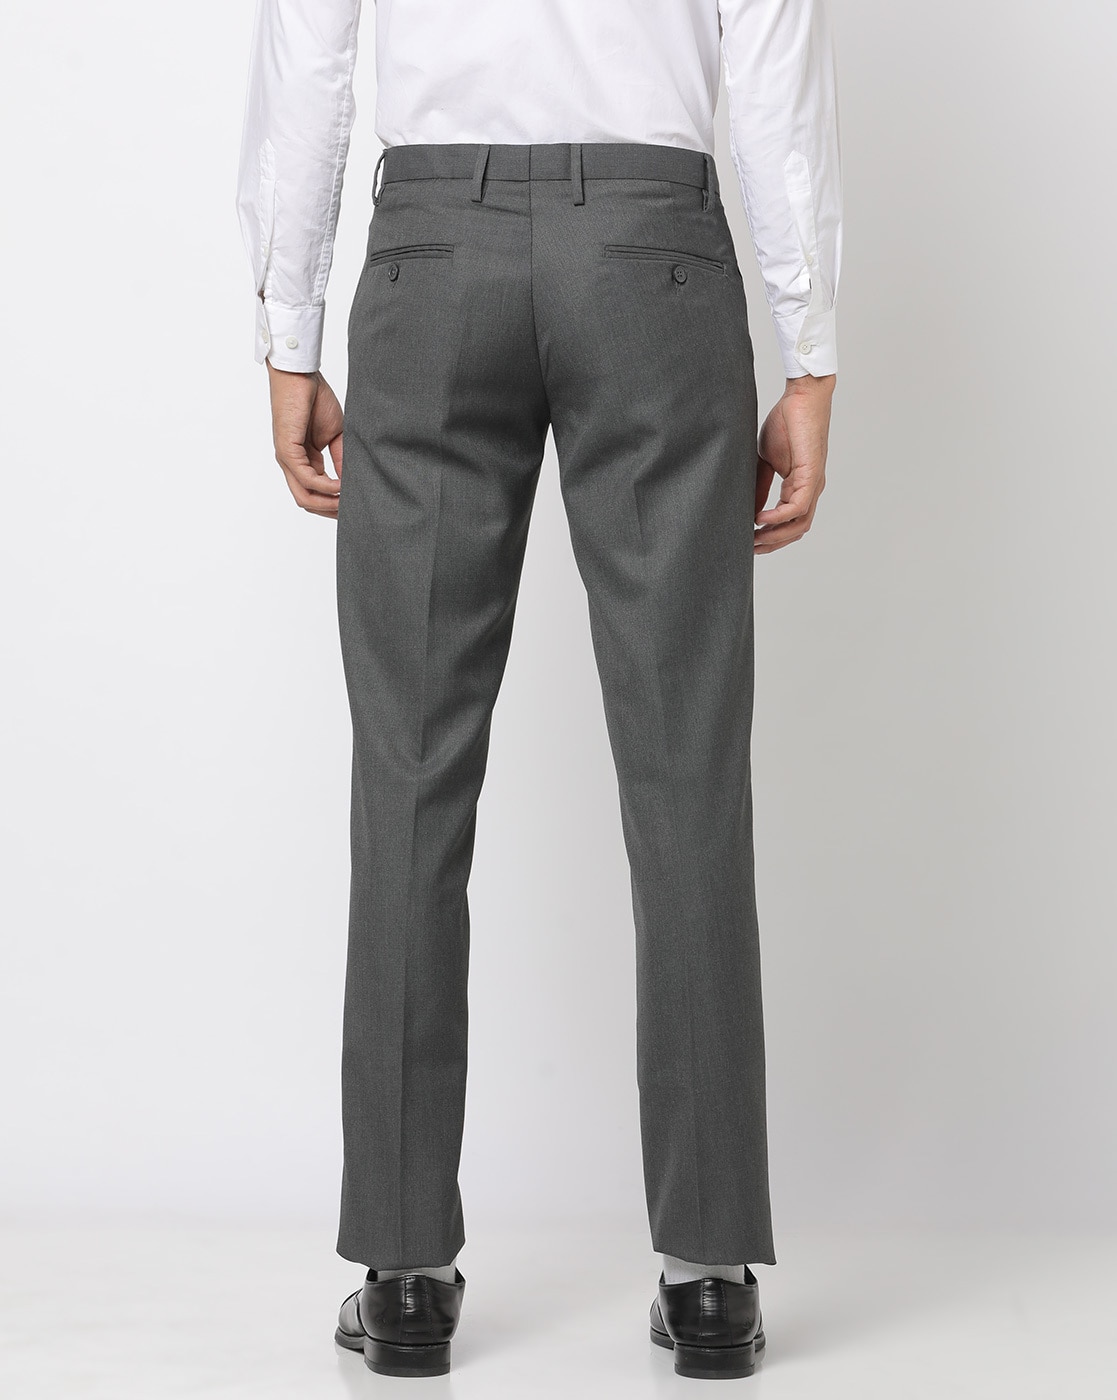 Island Green Men's Tour Tapered Stretch Trouser - Charcoal